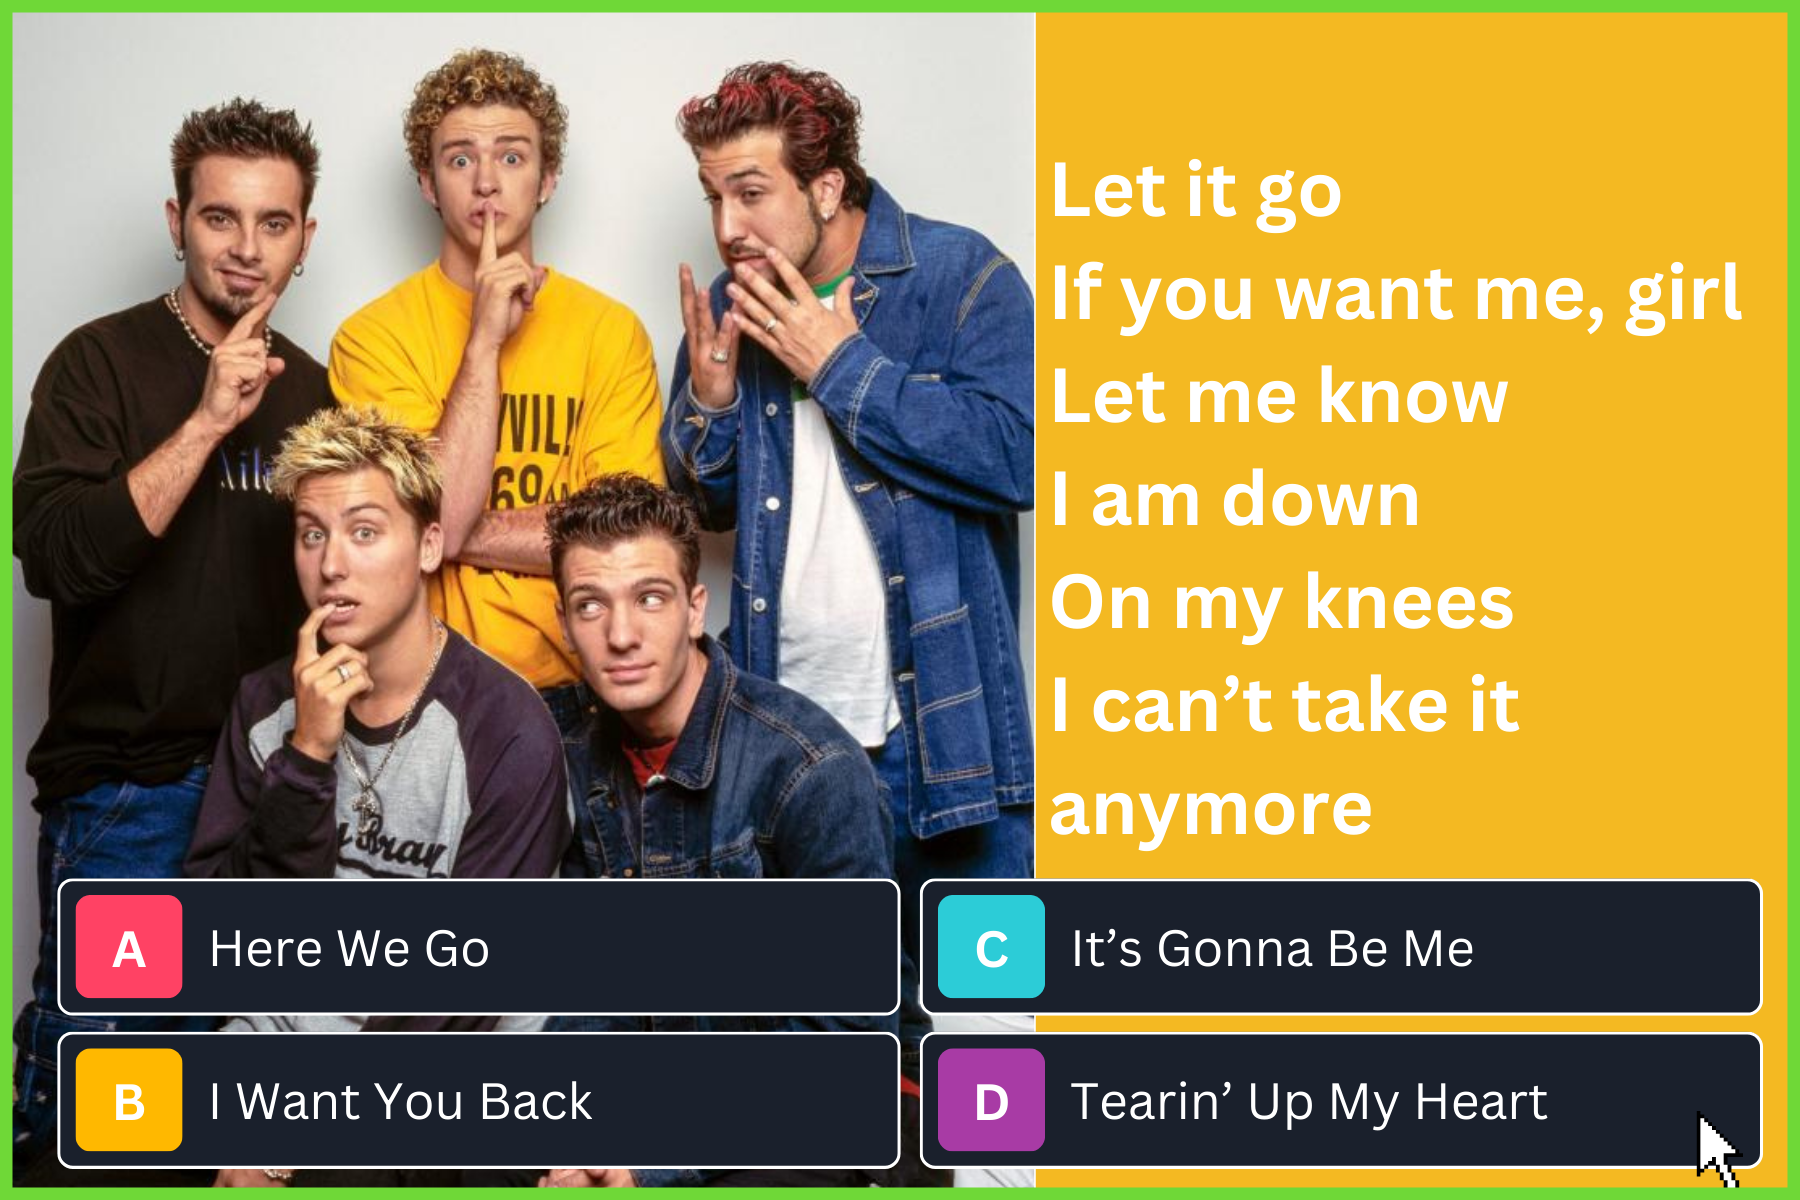 Can You Guess the *NSYNC Song Based on the Lyrics?